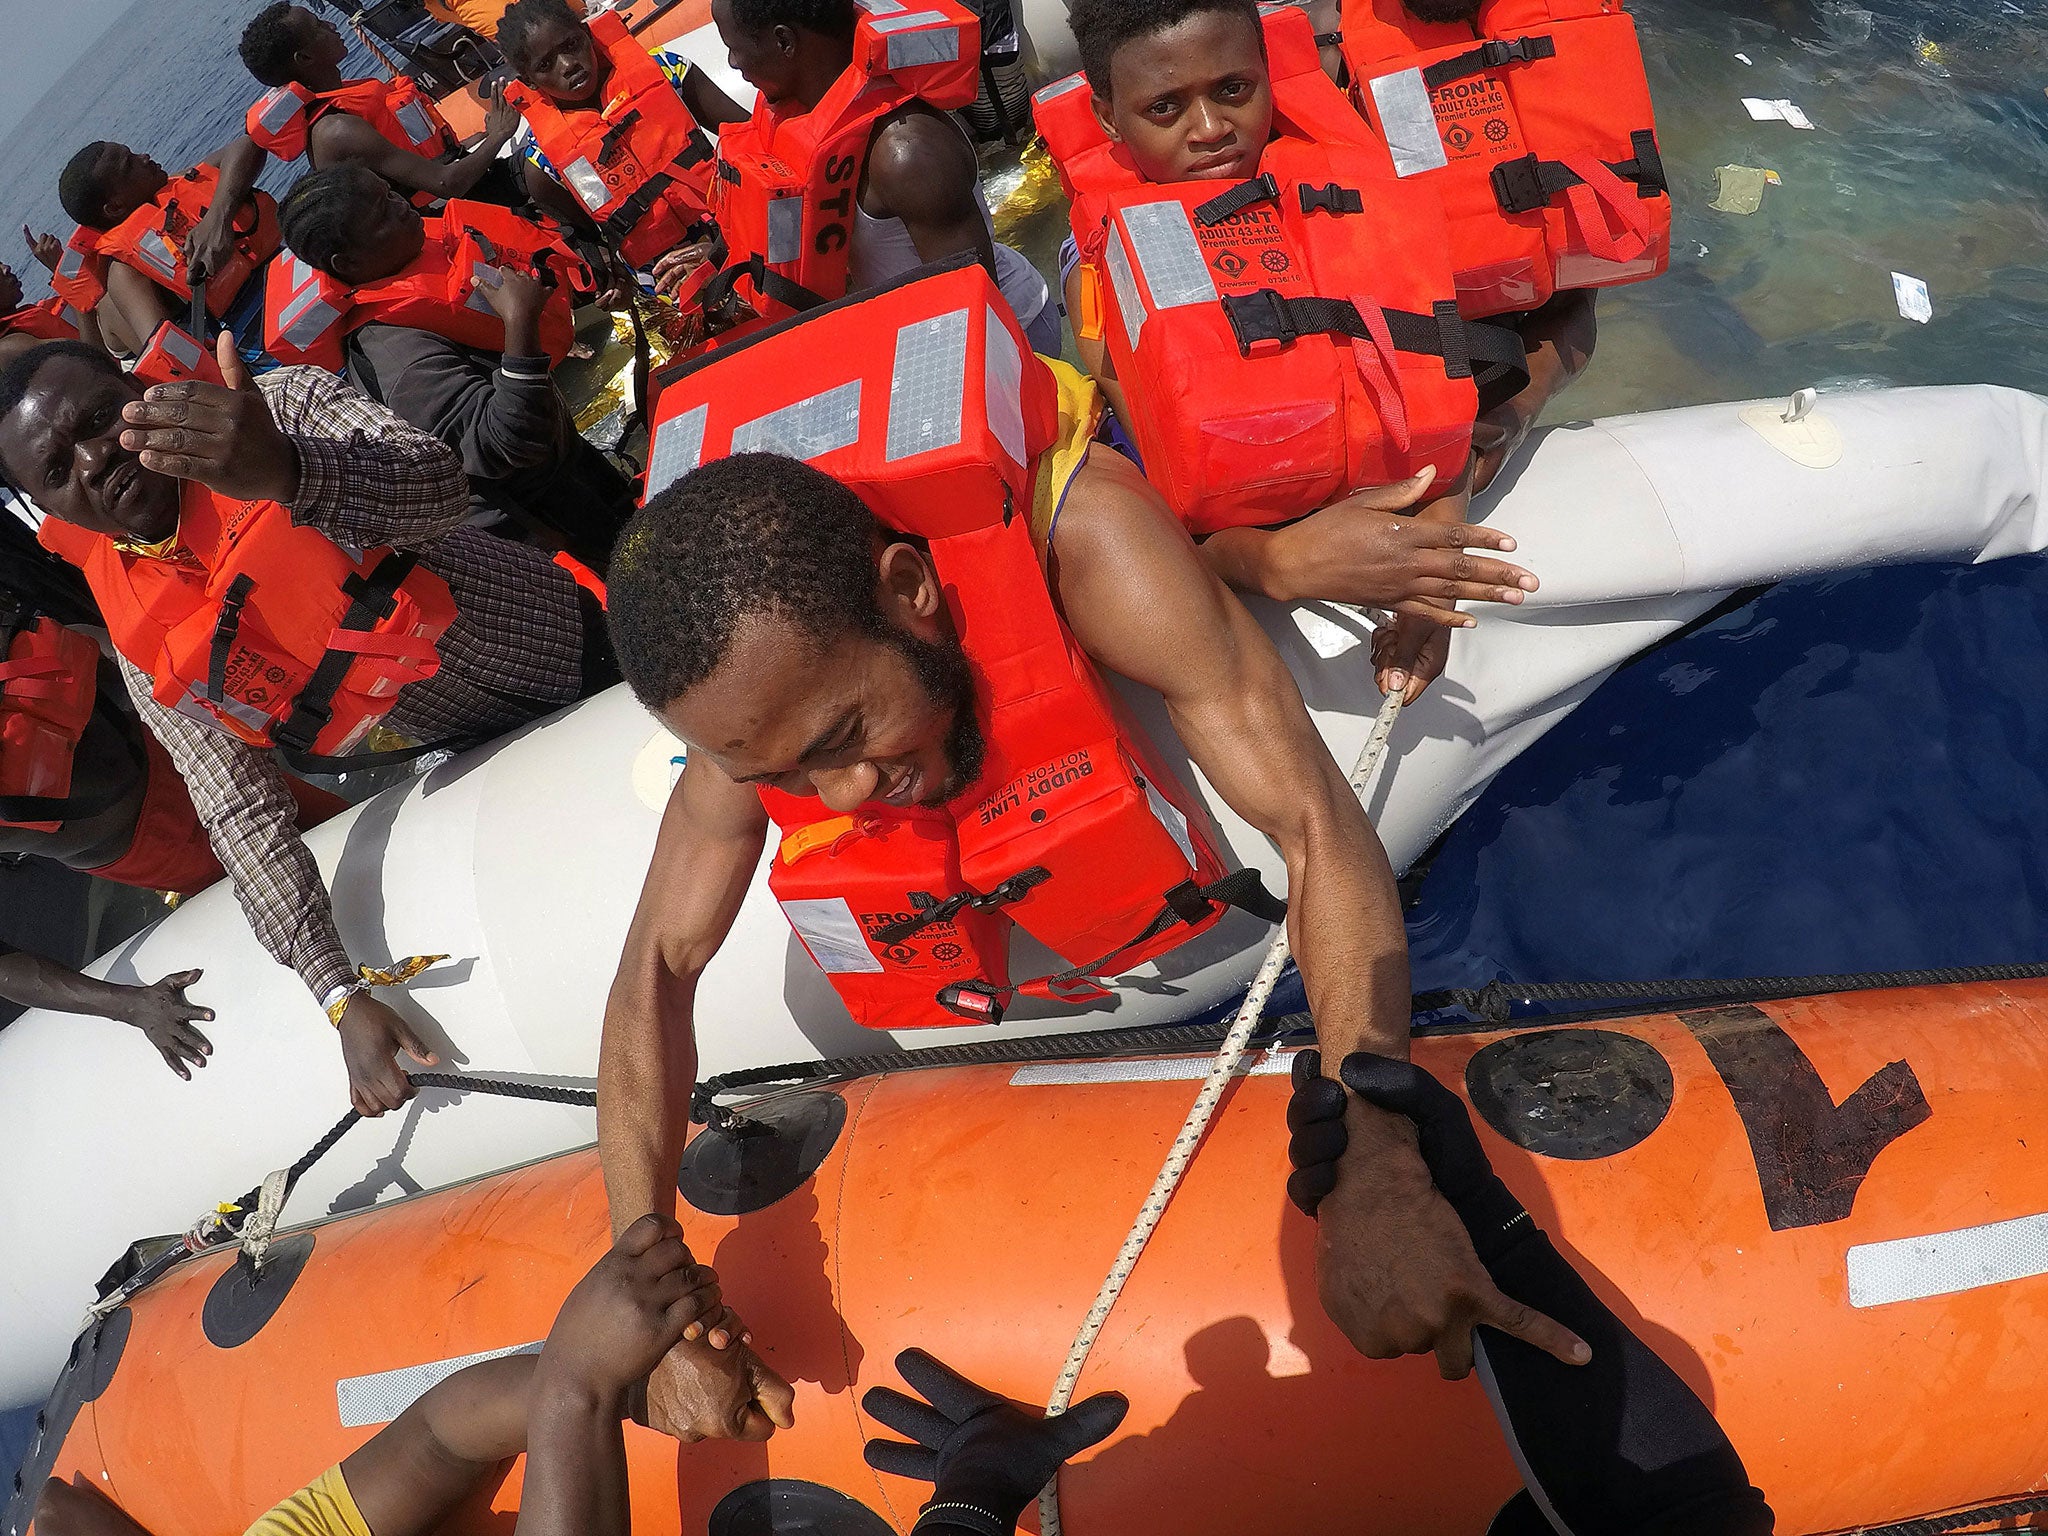 Migrants on a dinghy are rescued by Save the Children NGO crew from the ship ‘Vos Hestia’ off the coast of Libya, 17 June 2017